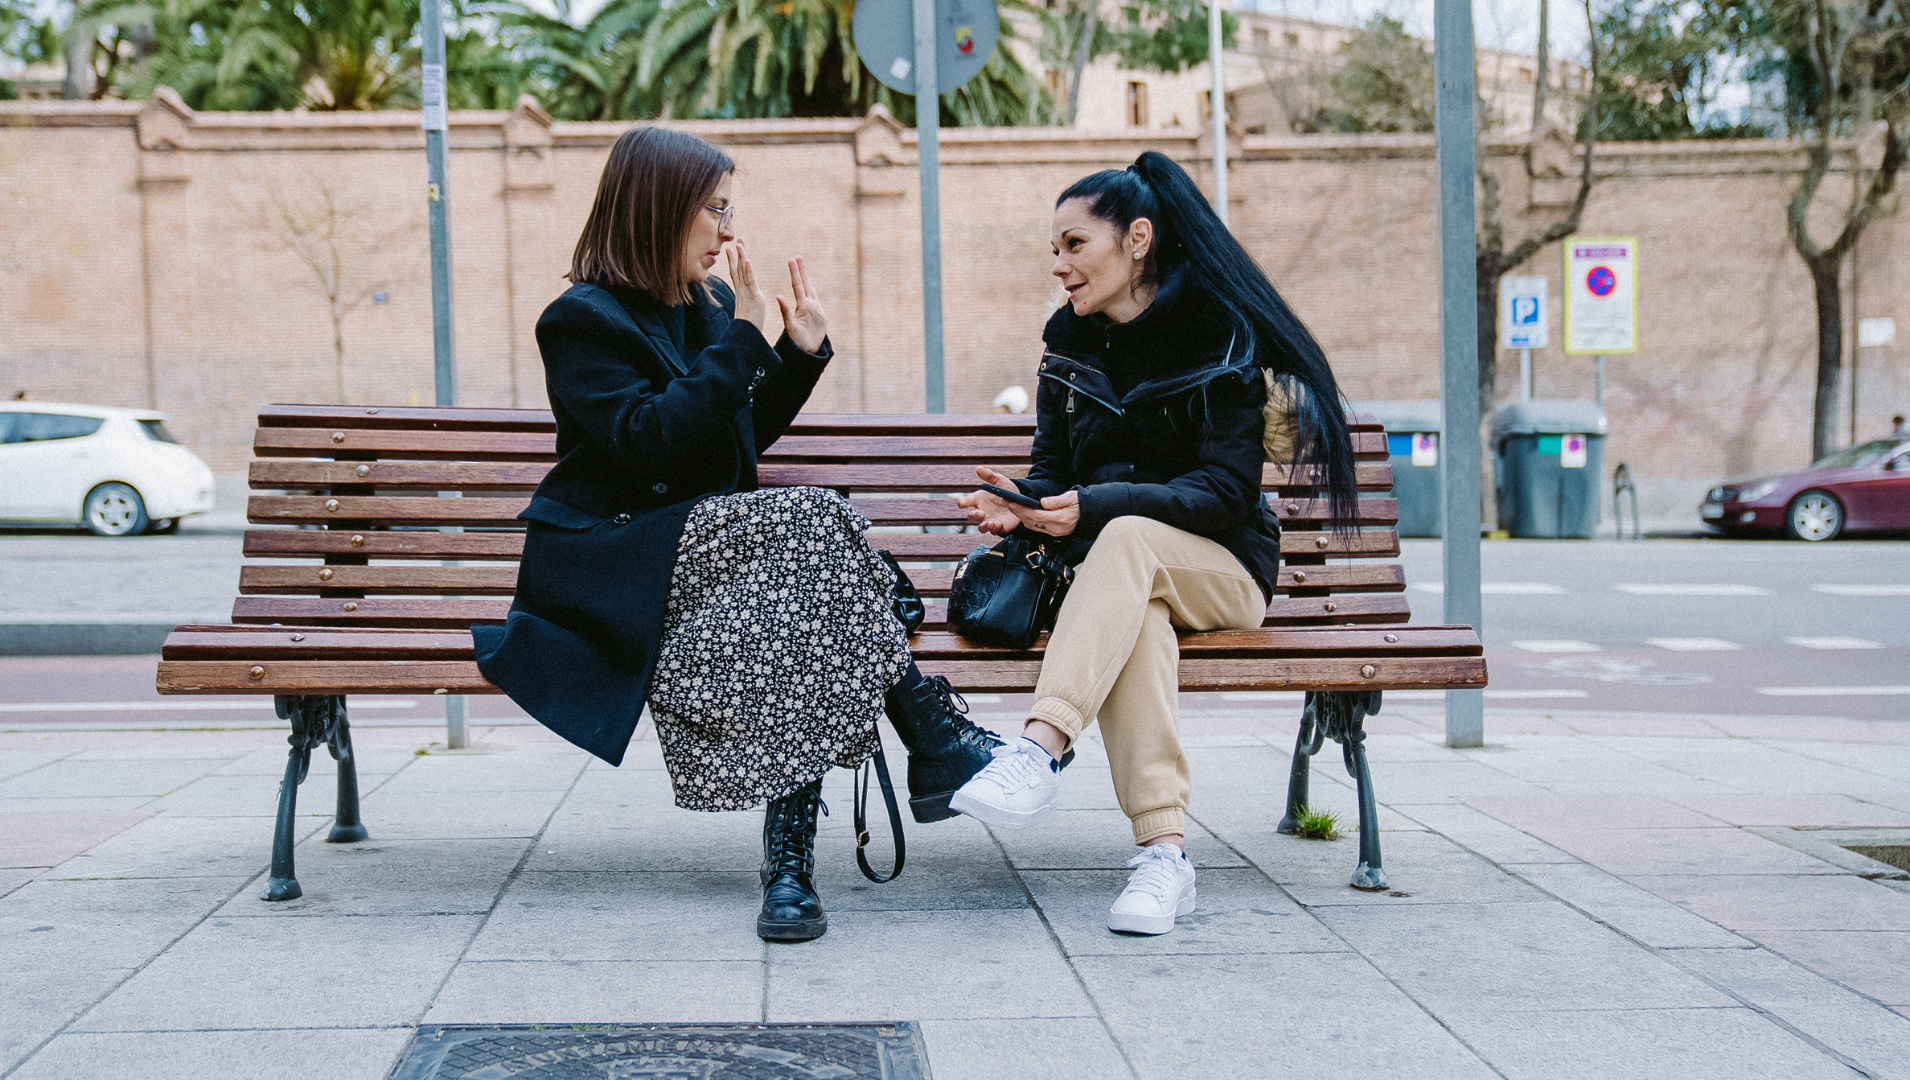 Maria and Helena are on a bench in the street having a friendly chat